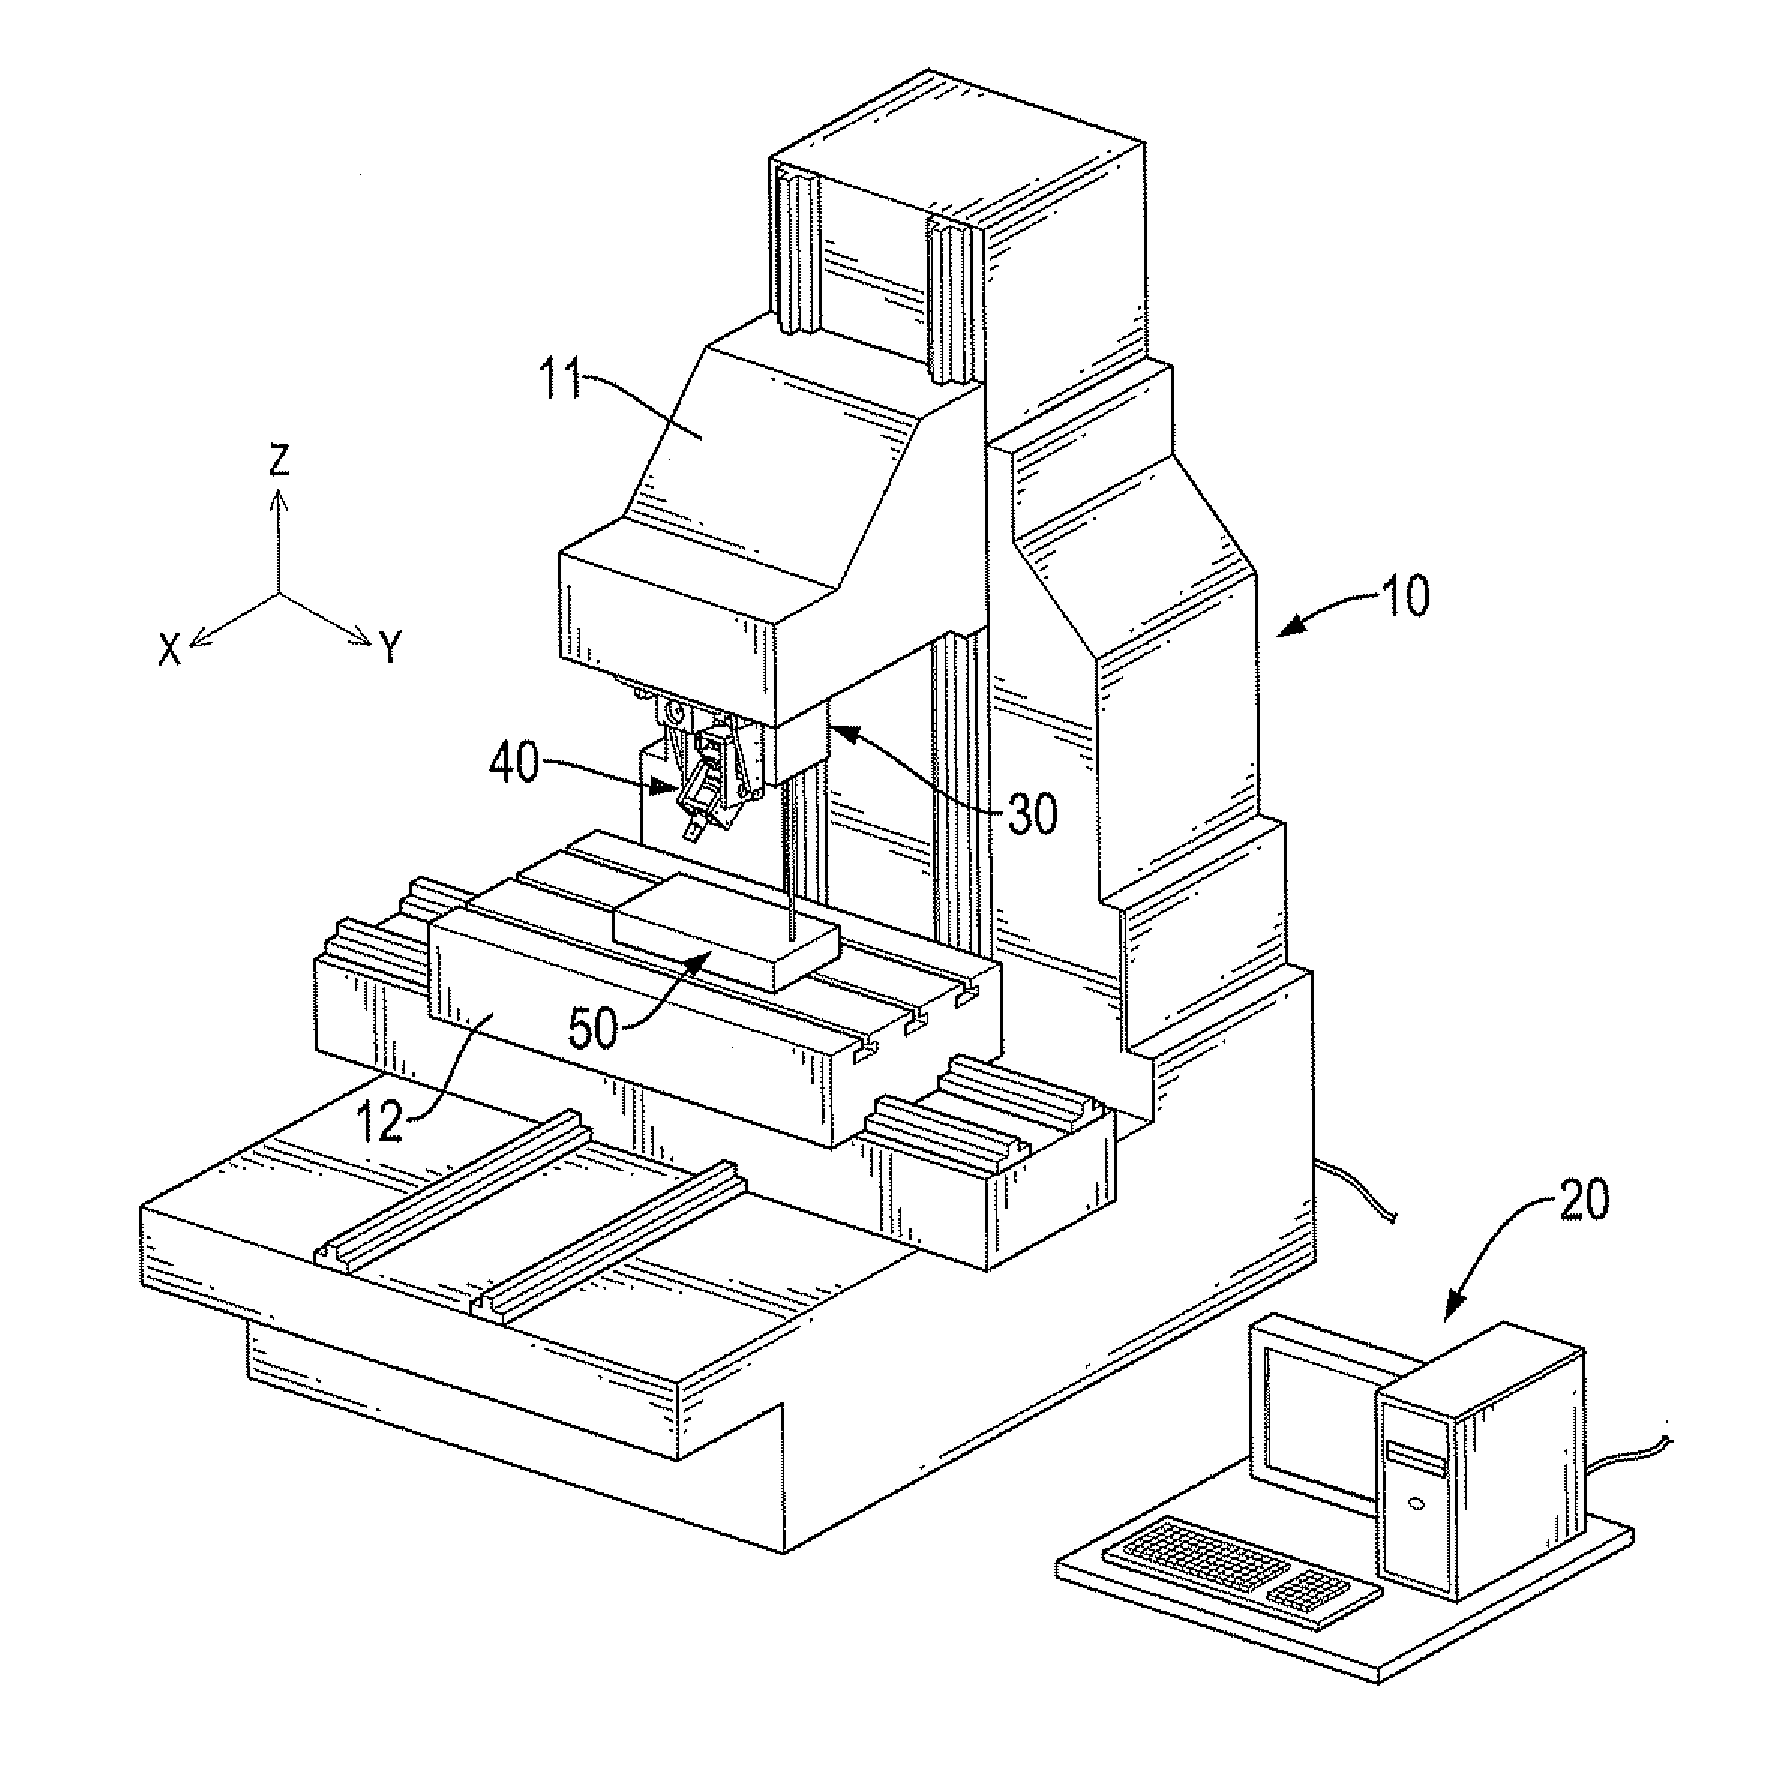 Method of numerical-control scraping of a work piece